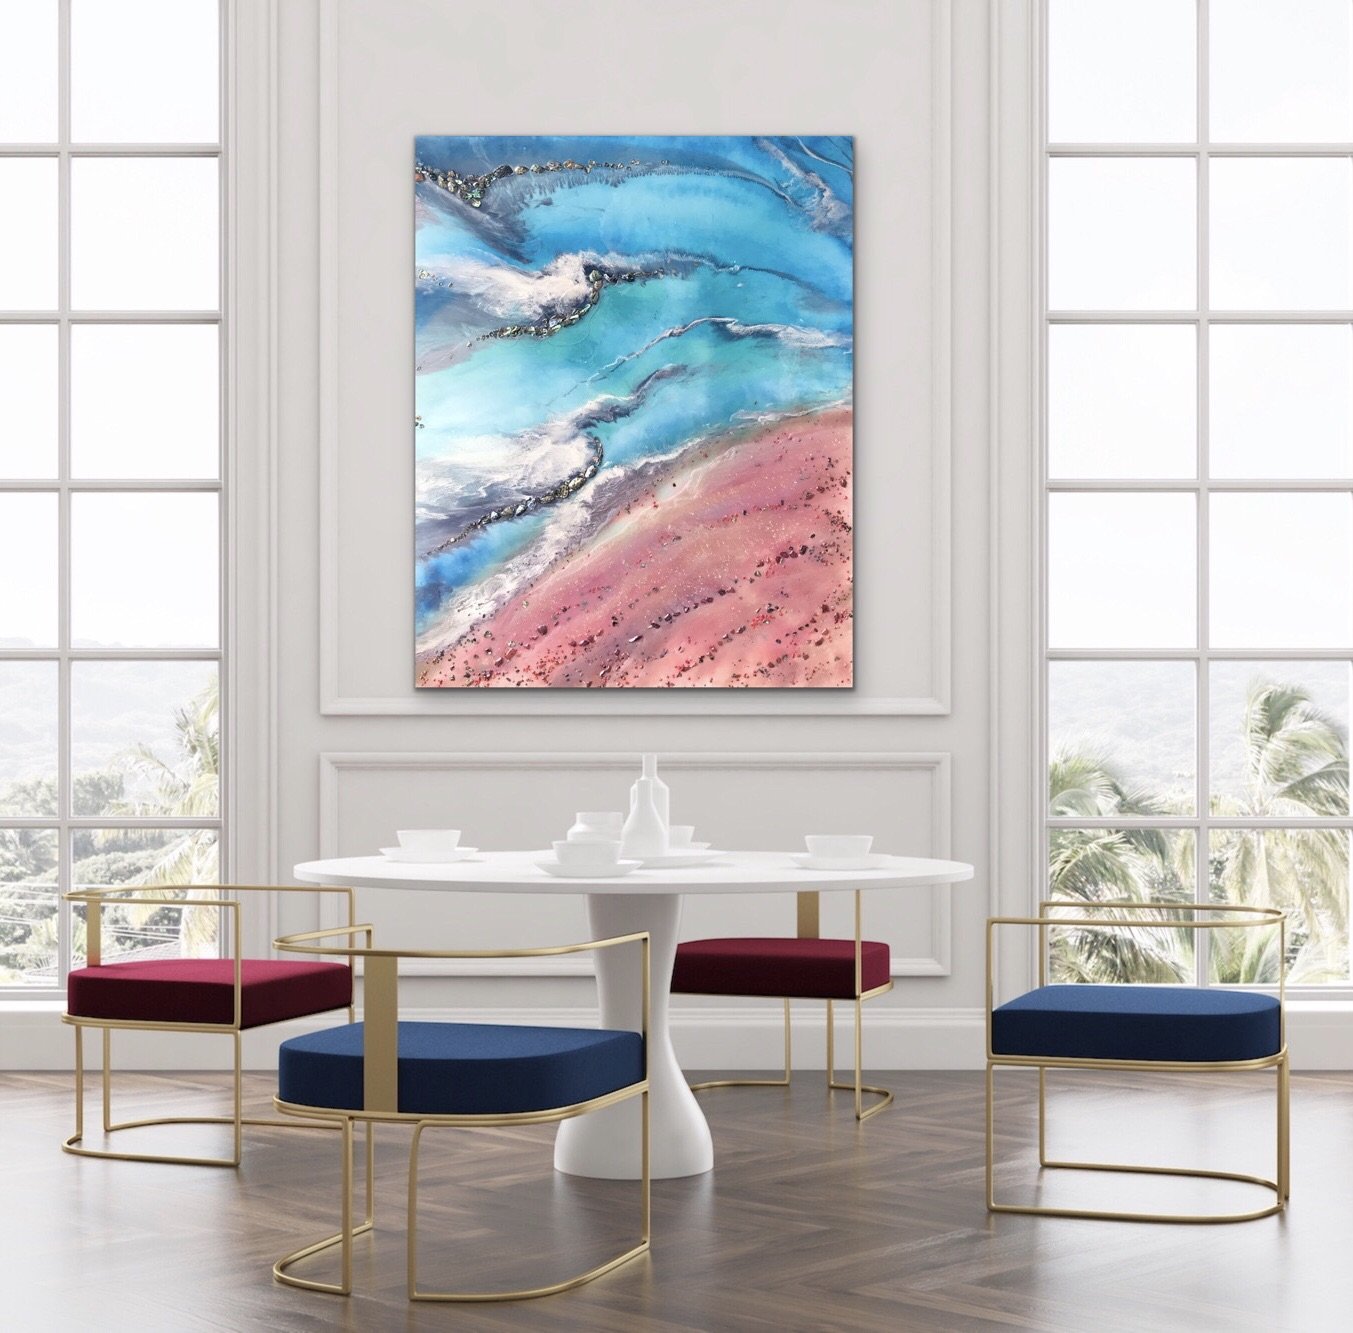 Azure Coastline. Abstract Ocean. Original Artwork with Abalone Shells and Coral 120x150cm.